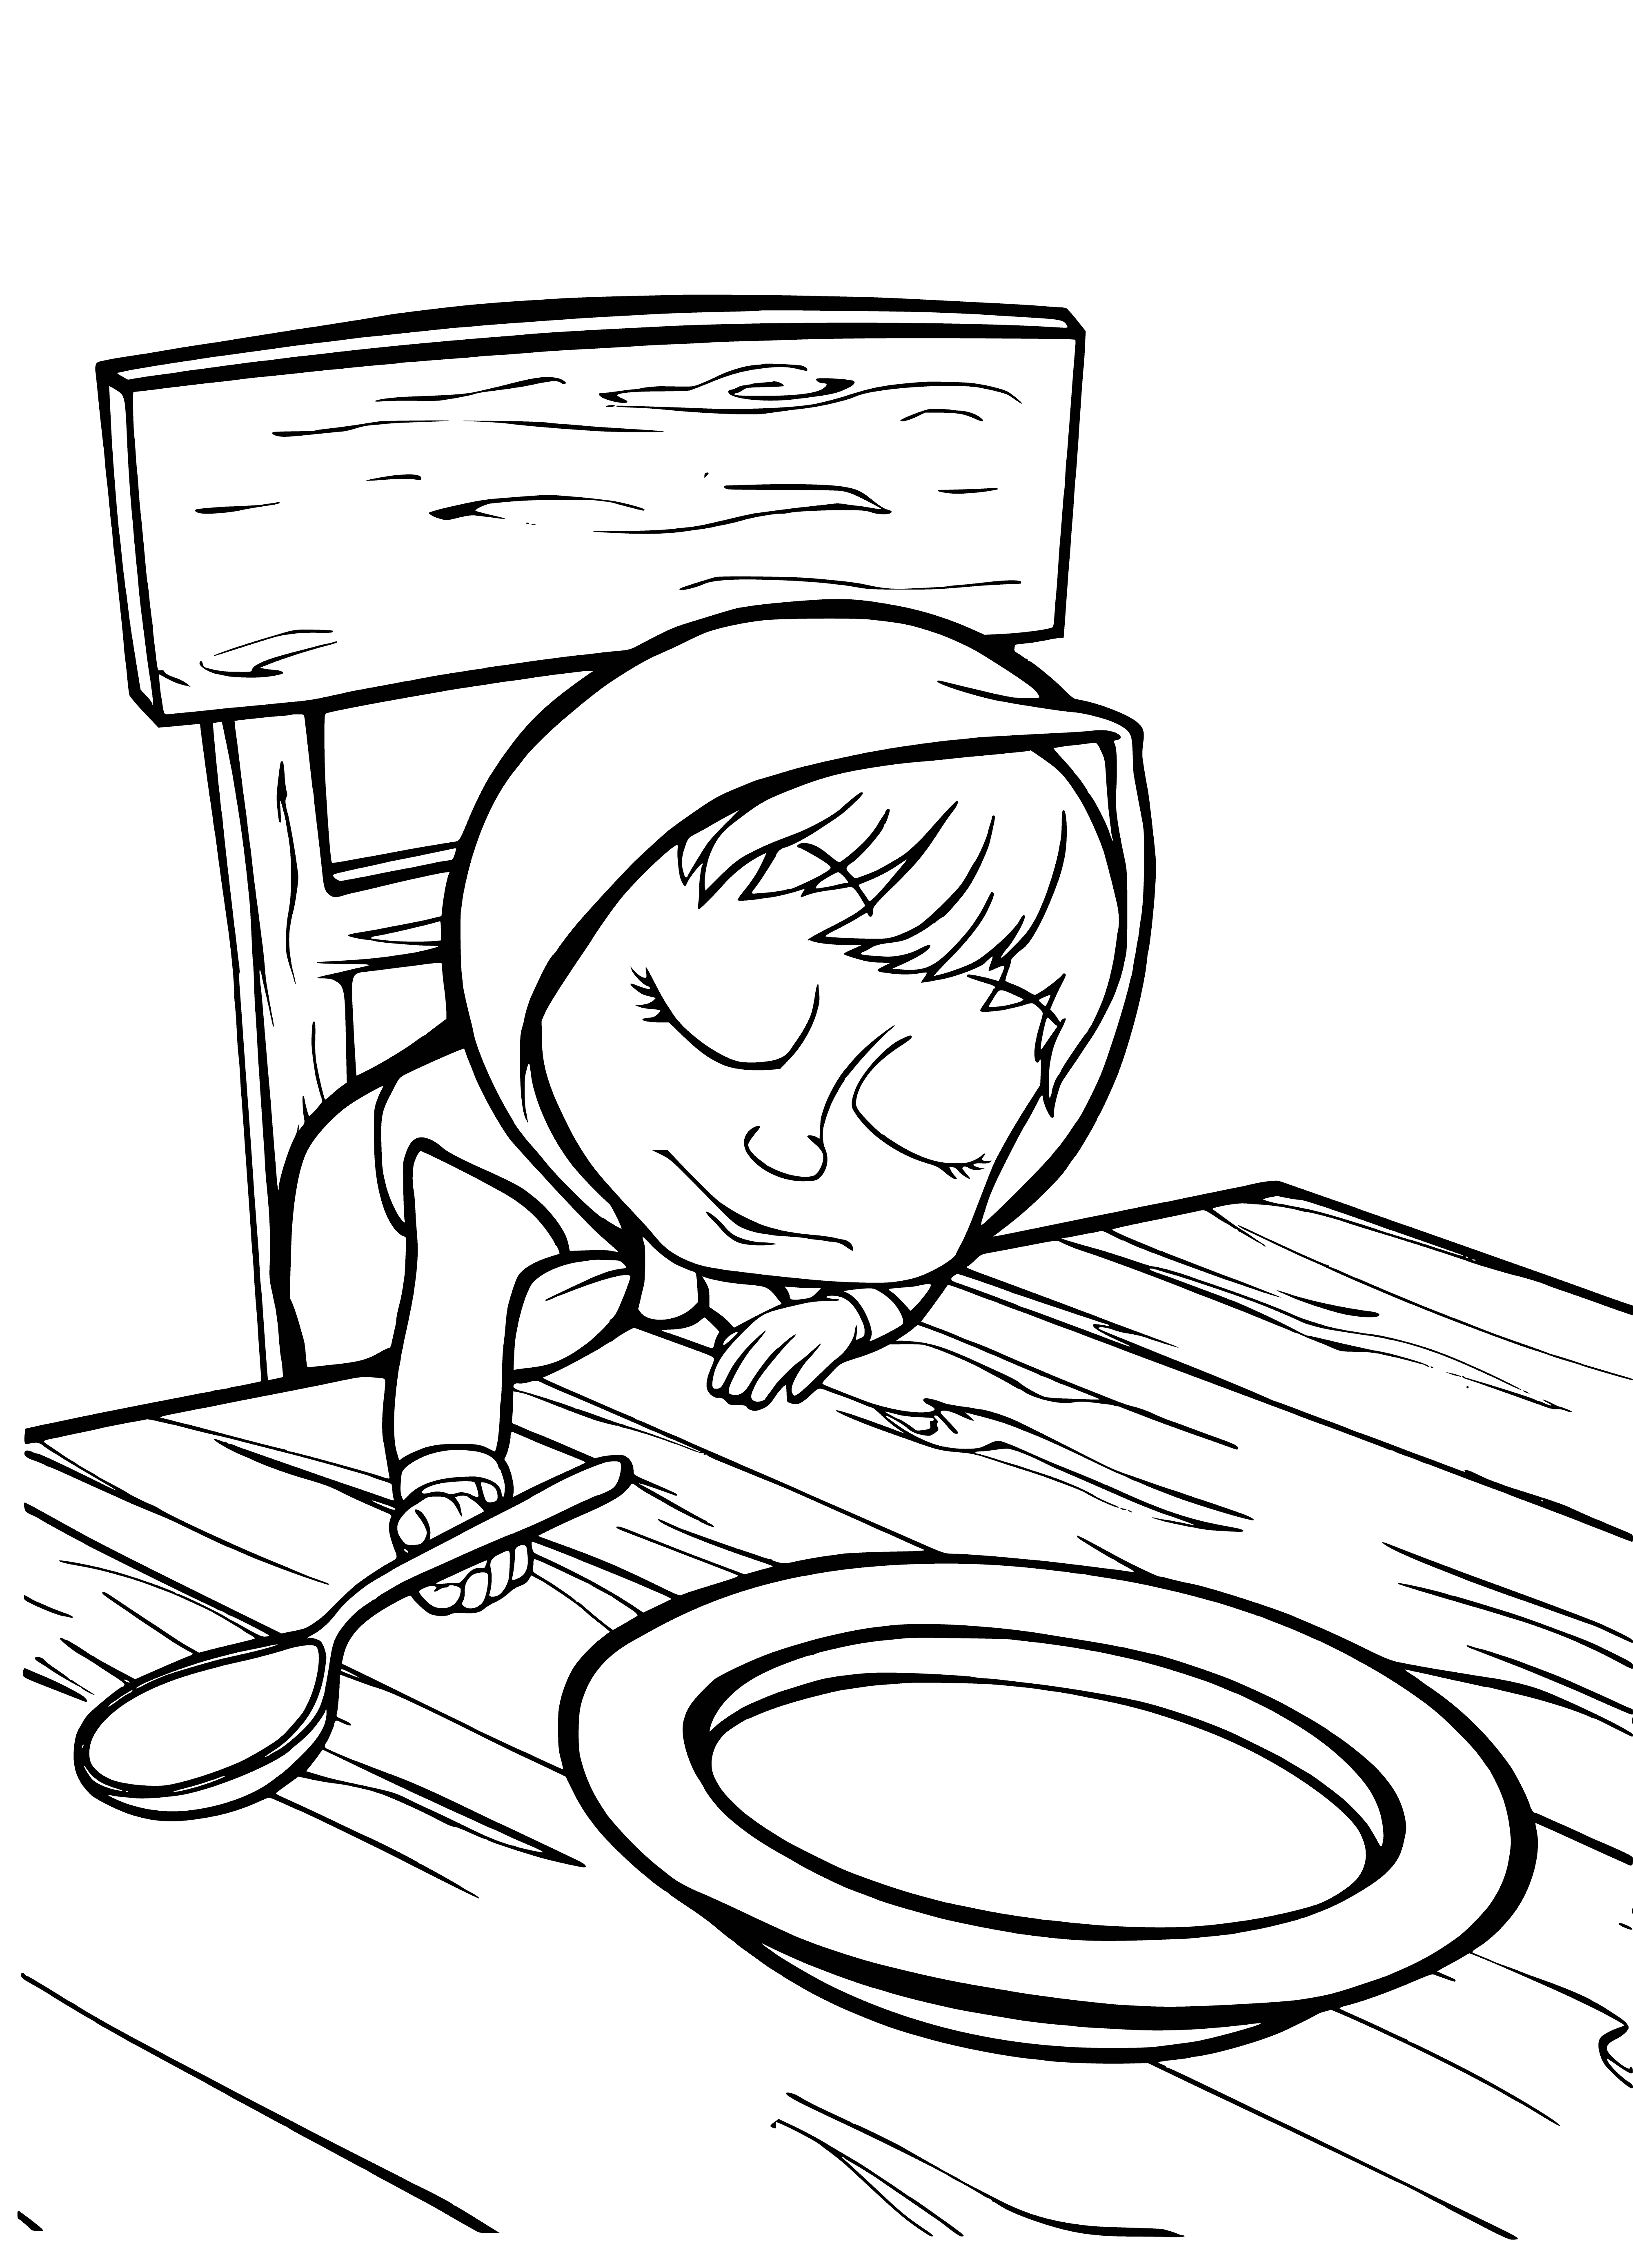 coloring page: Masha dozes off surrounded by a creative mess — unfinished drawings, crayons & spilled juice.